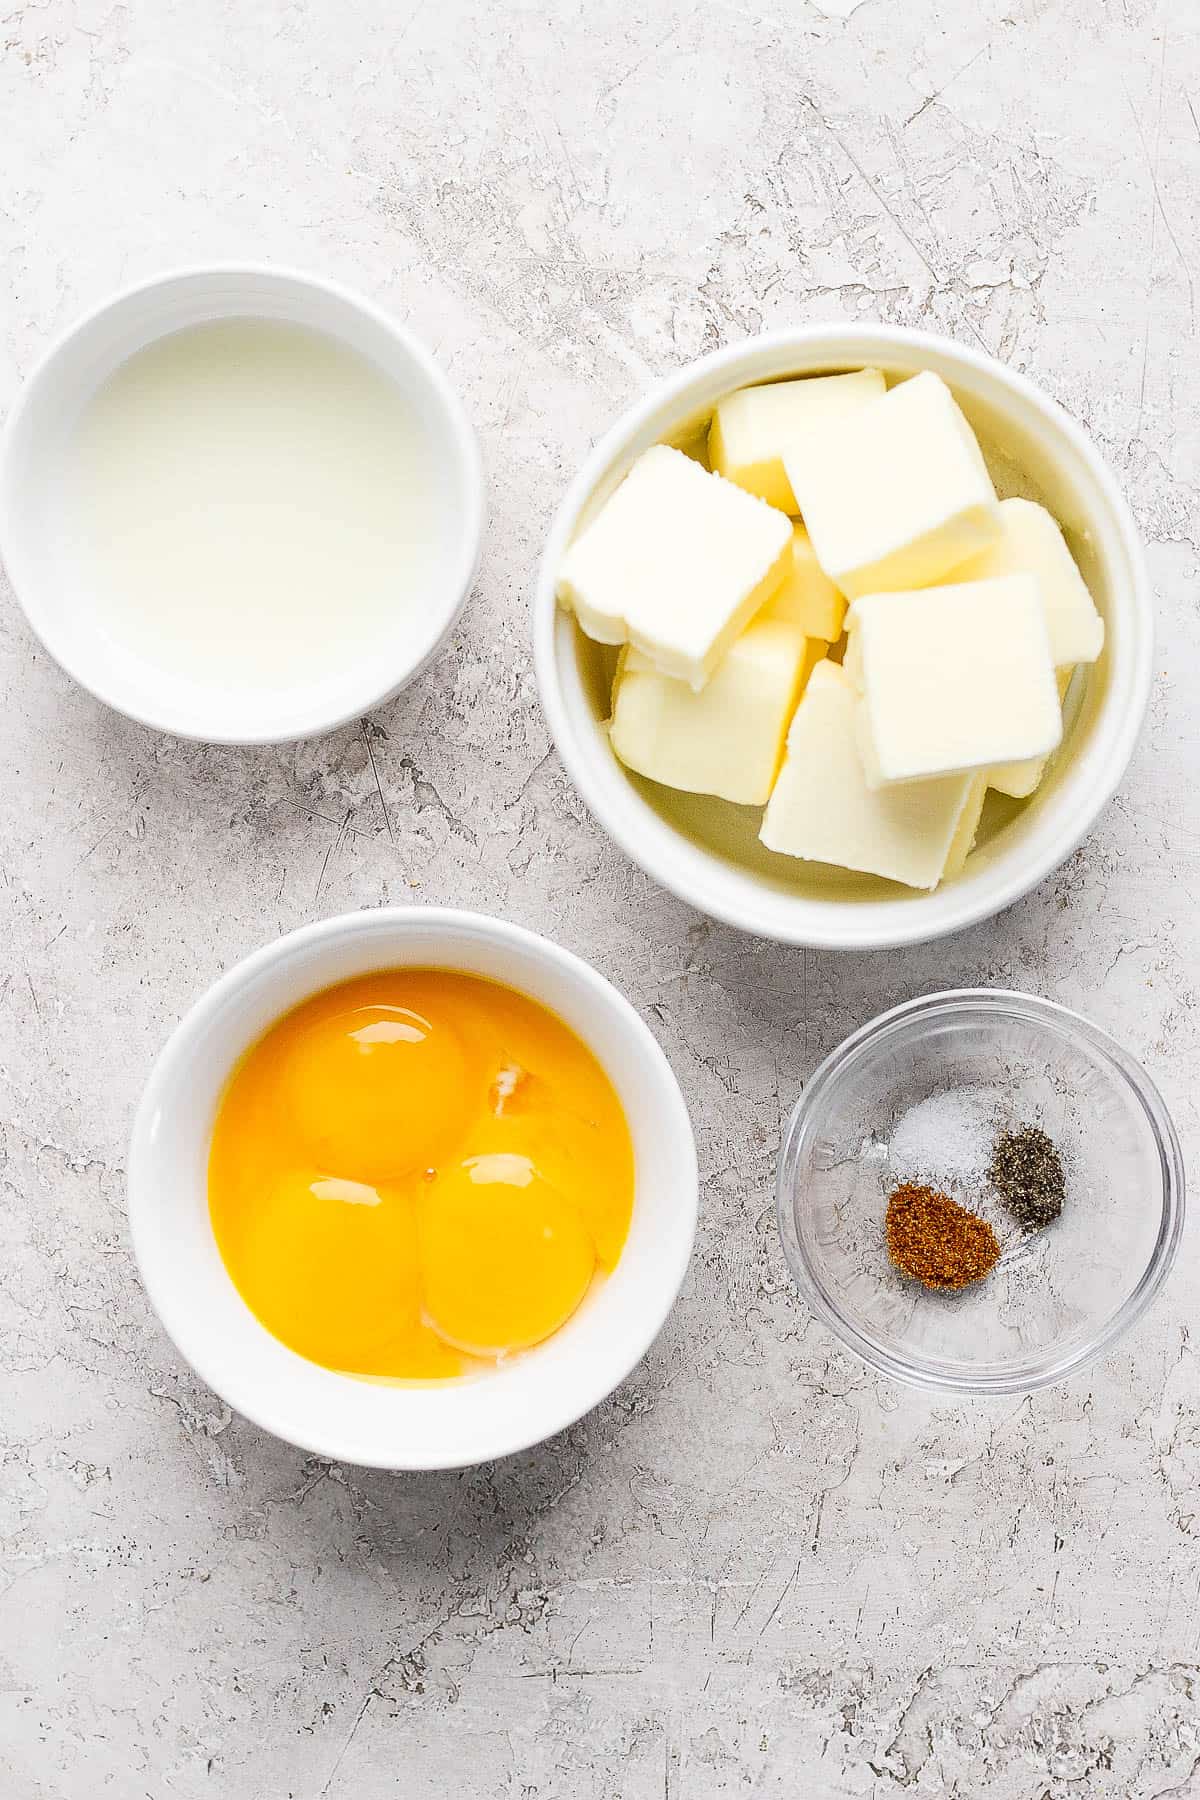 The ingredients for hollandaise sauce in separate bowls.